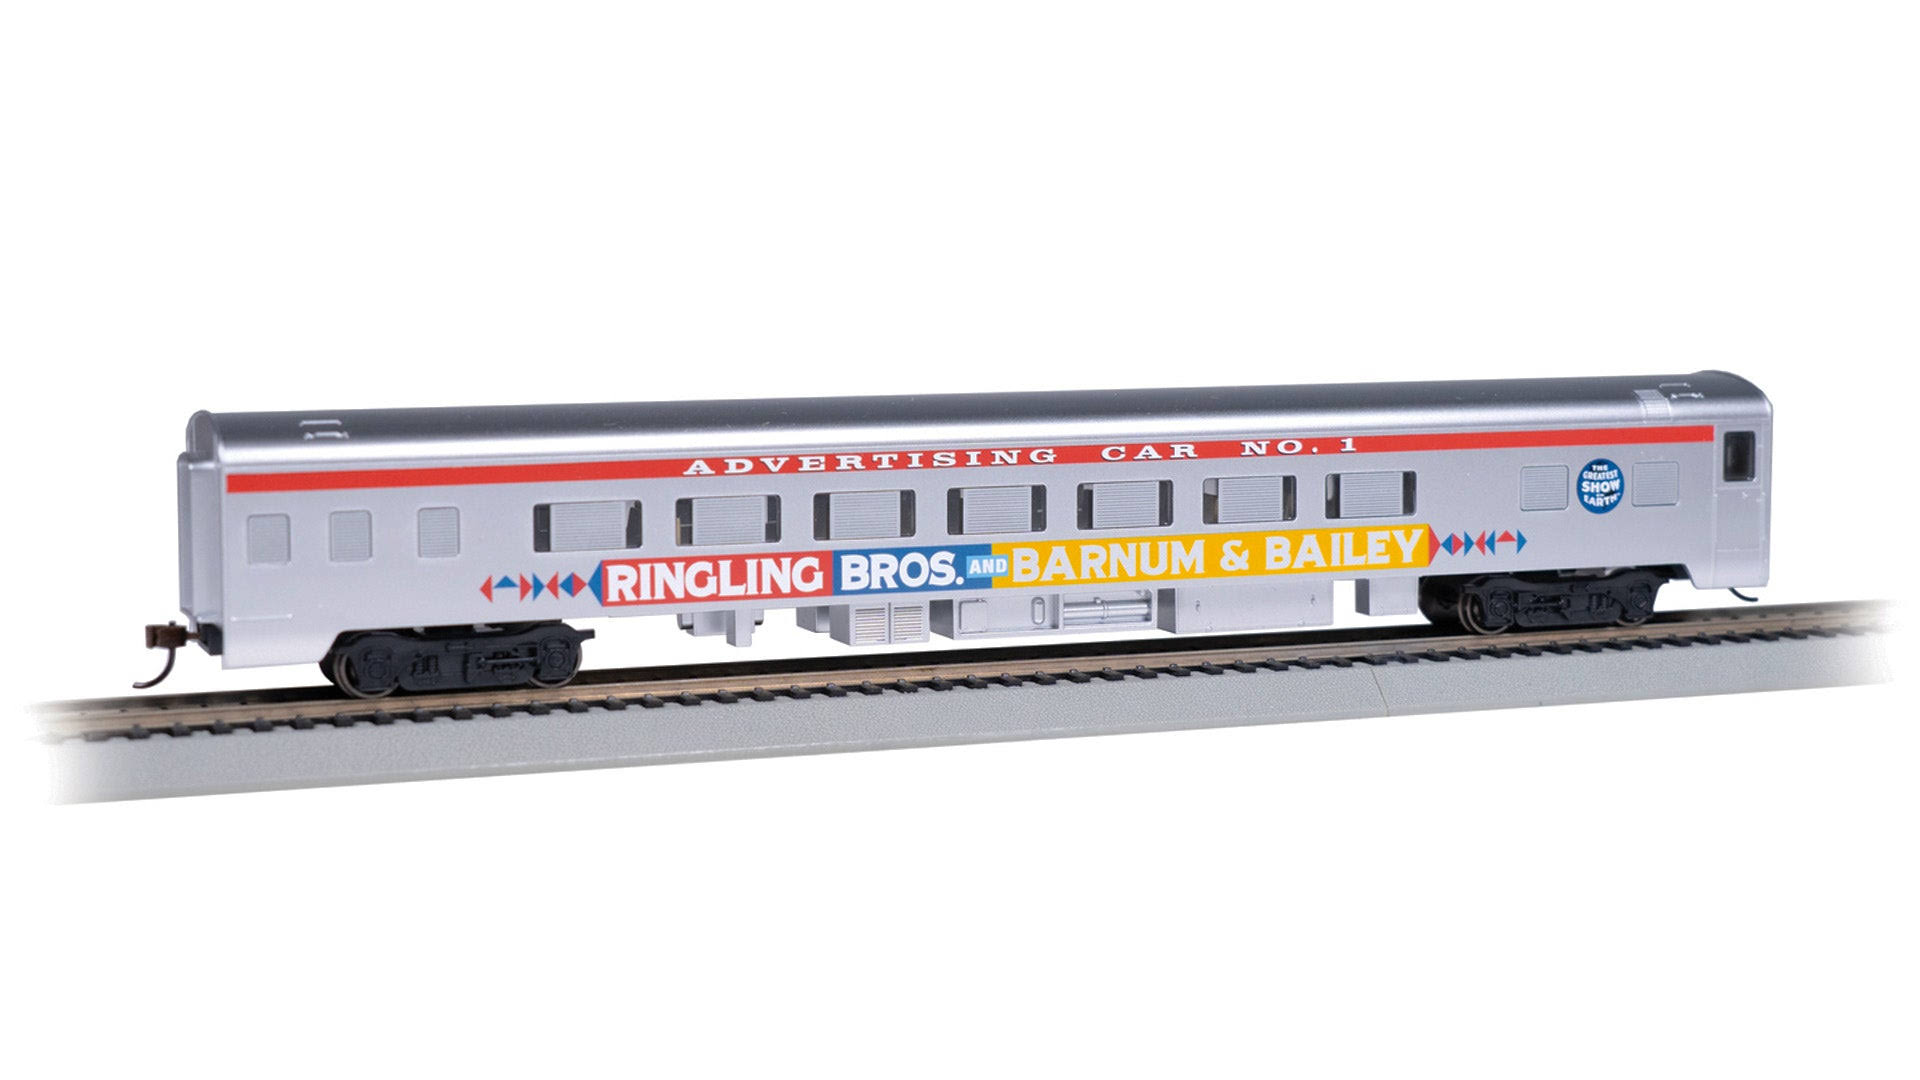 Bachmann - 85' Smooth-Side Coach w/Lights - Ready to Run - Ringling Bros. and Barnum & Bailey #1 (Advertising Car, Silver, Red, Yellow - 160-14215